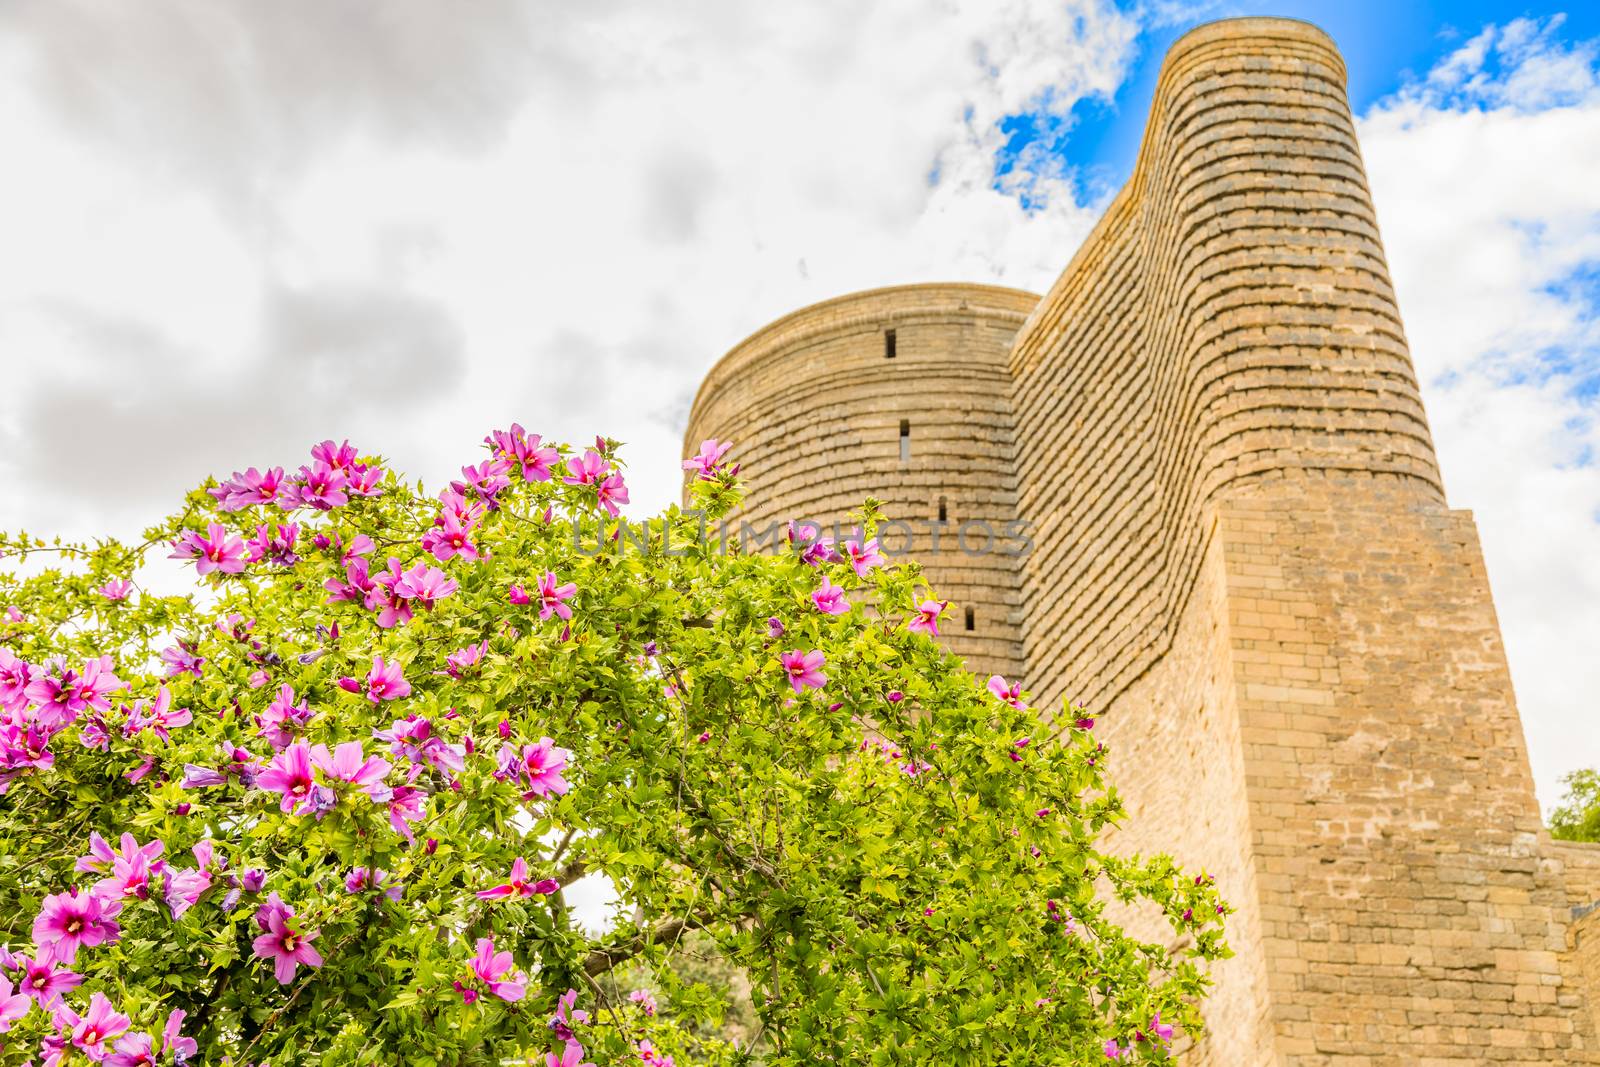 Gız Galası medieval  tower with flowers tree in the foreground by ambeon